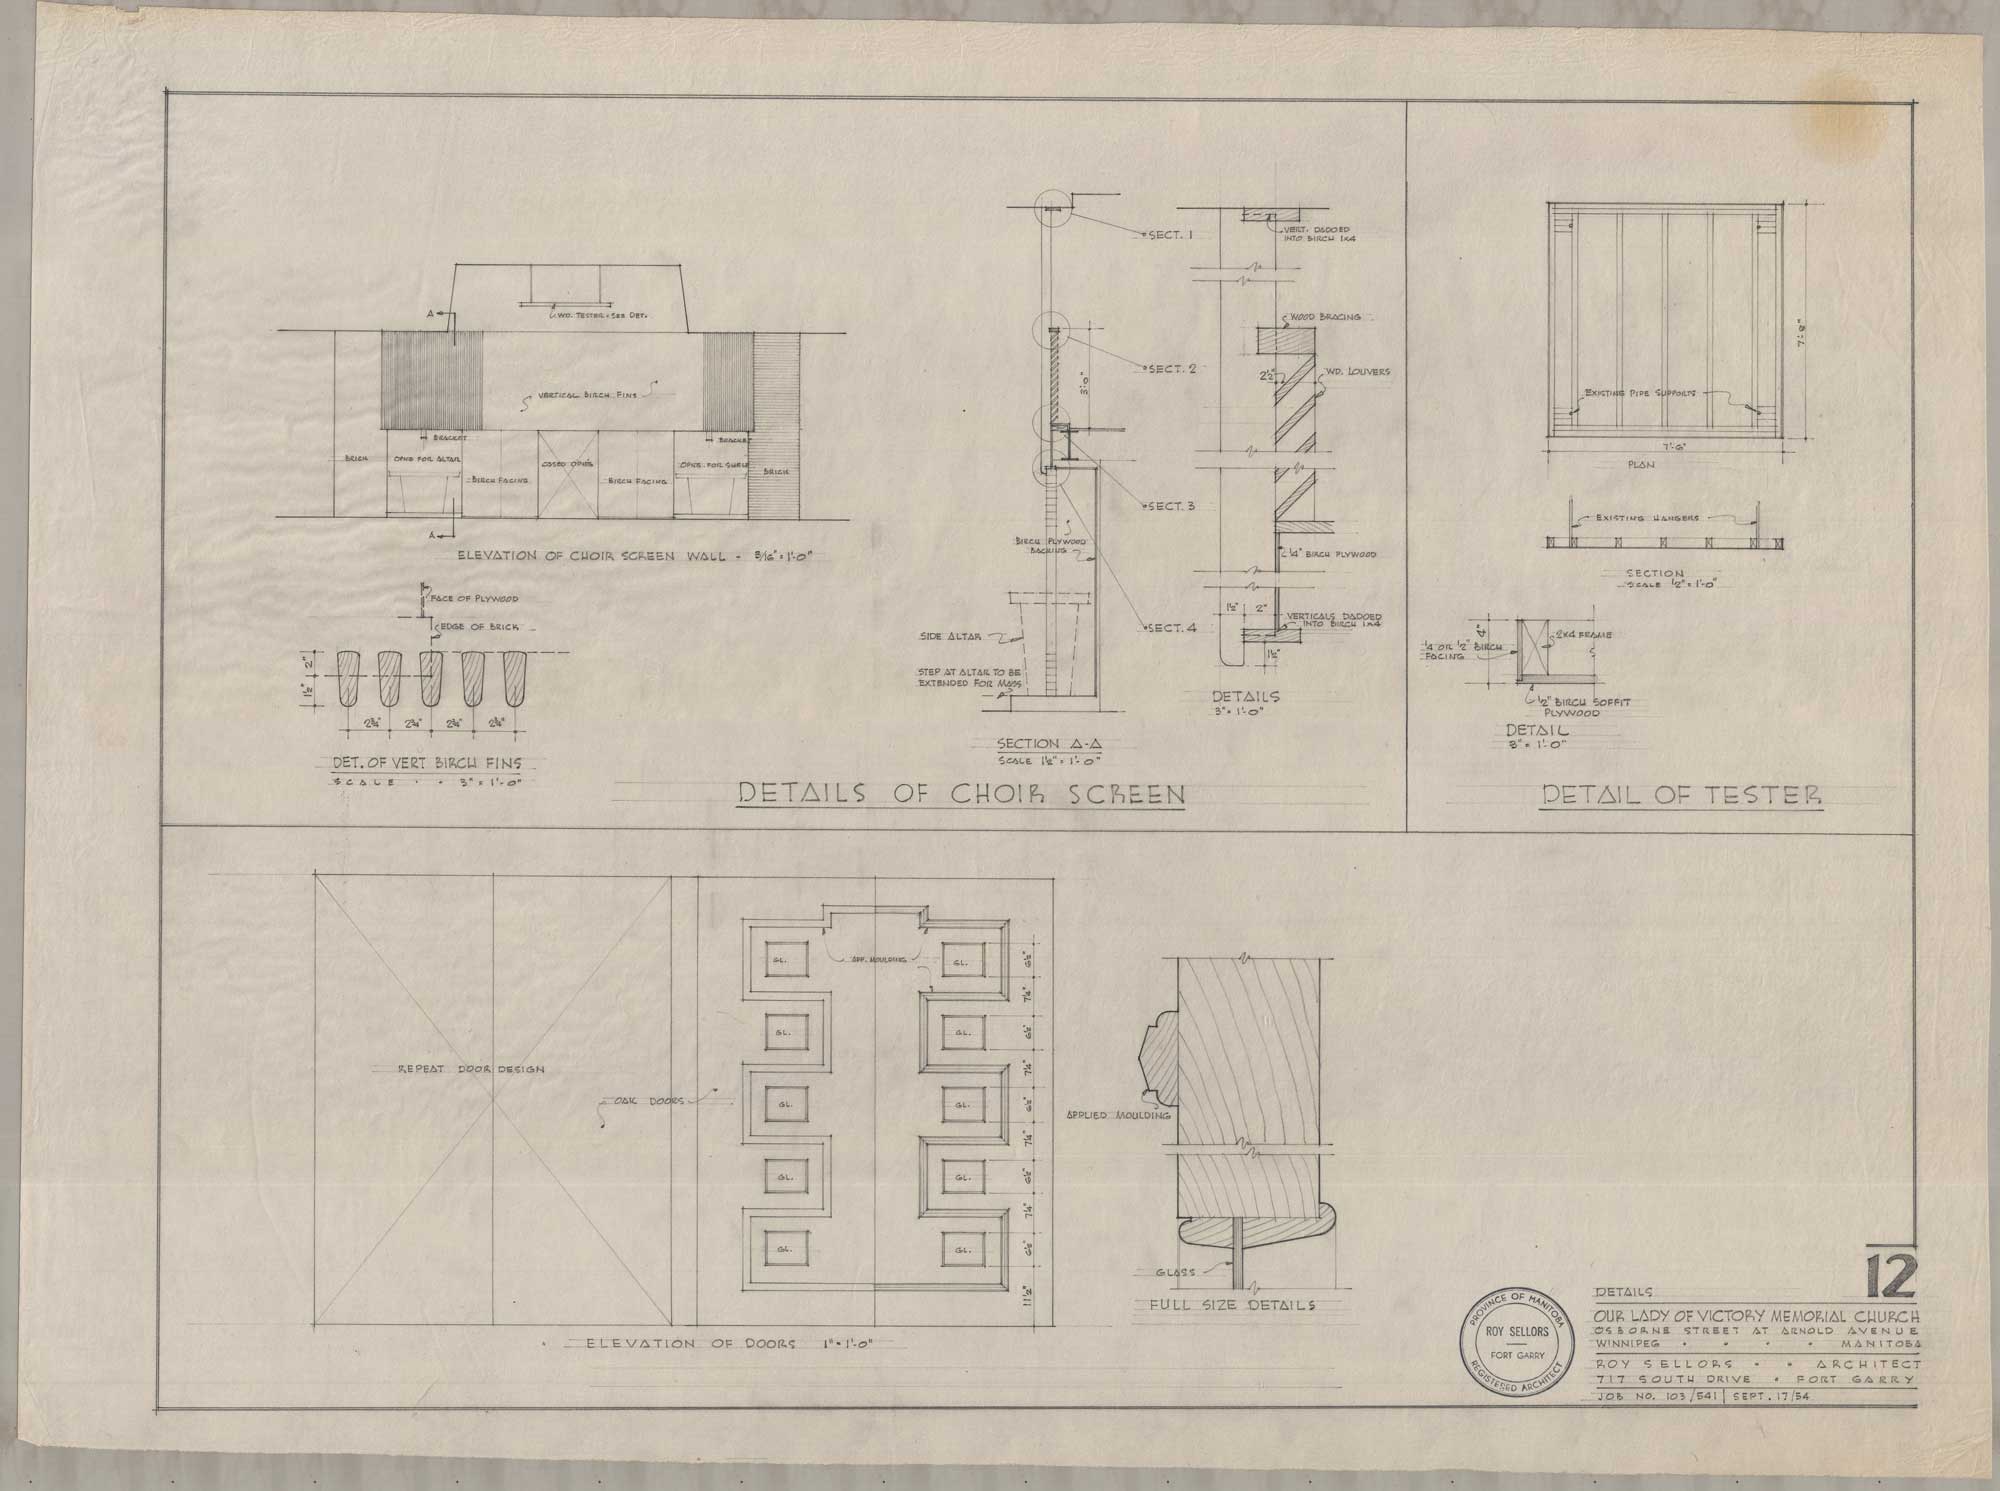 Image shows drawings of choir screen, tester, and doorway for Our Lady of Victory Church.